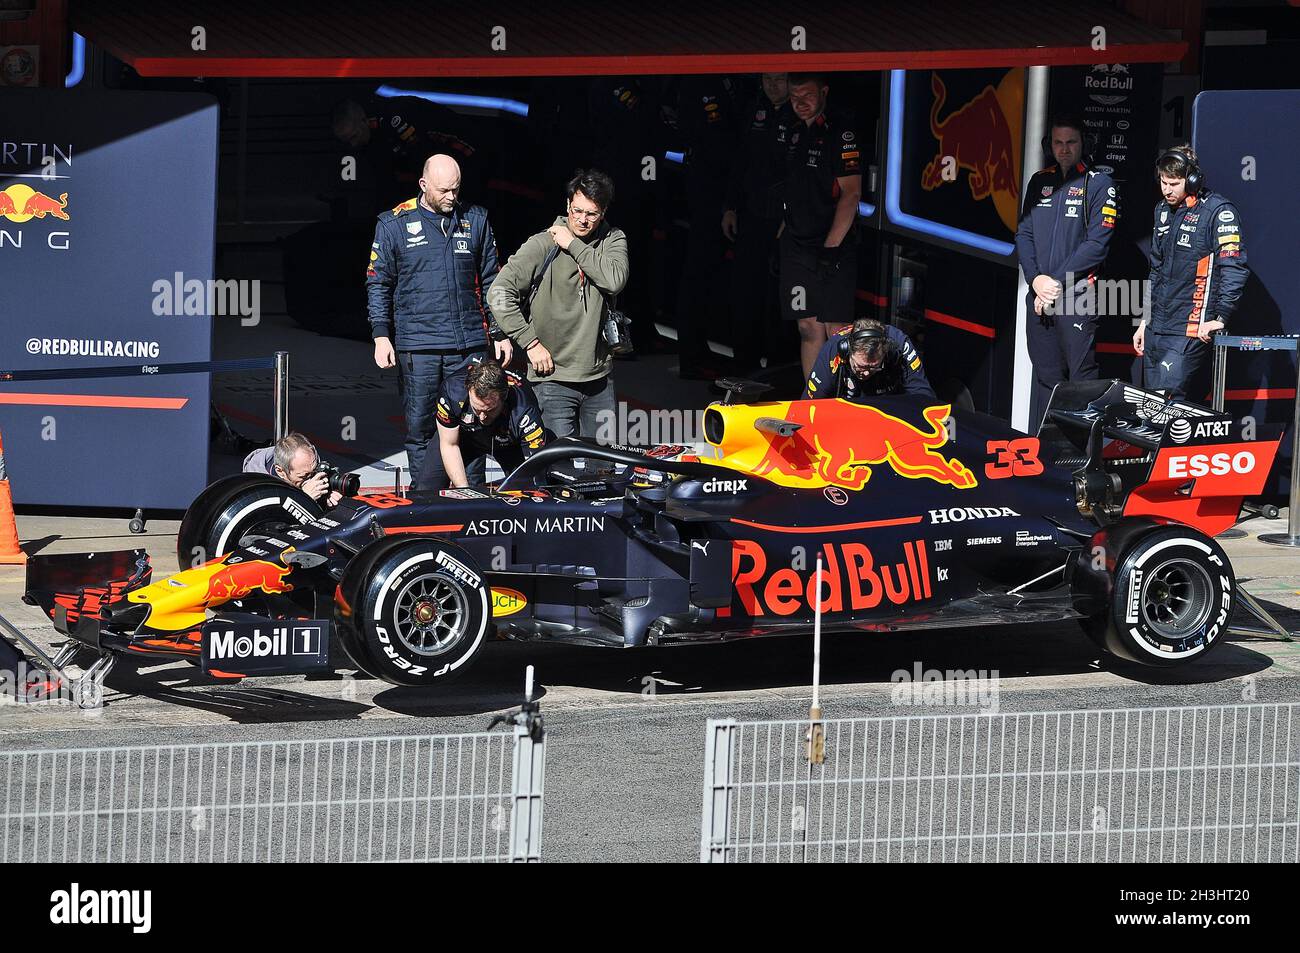 Max Verstappen-Red Bull in the preseason training of the Catalonia circuit in 2019, Spain Photo - Alamy